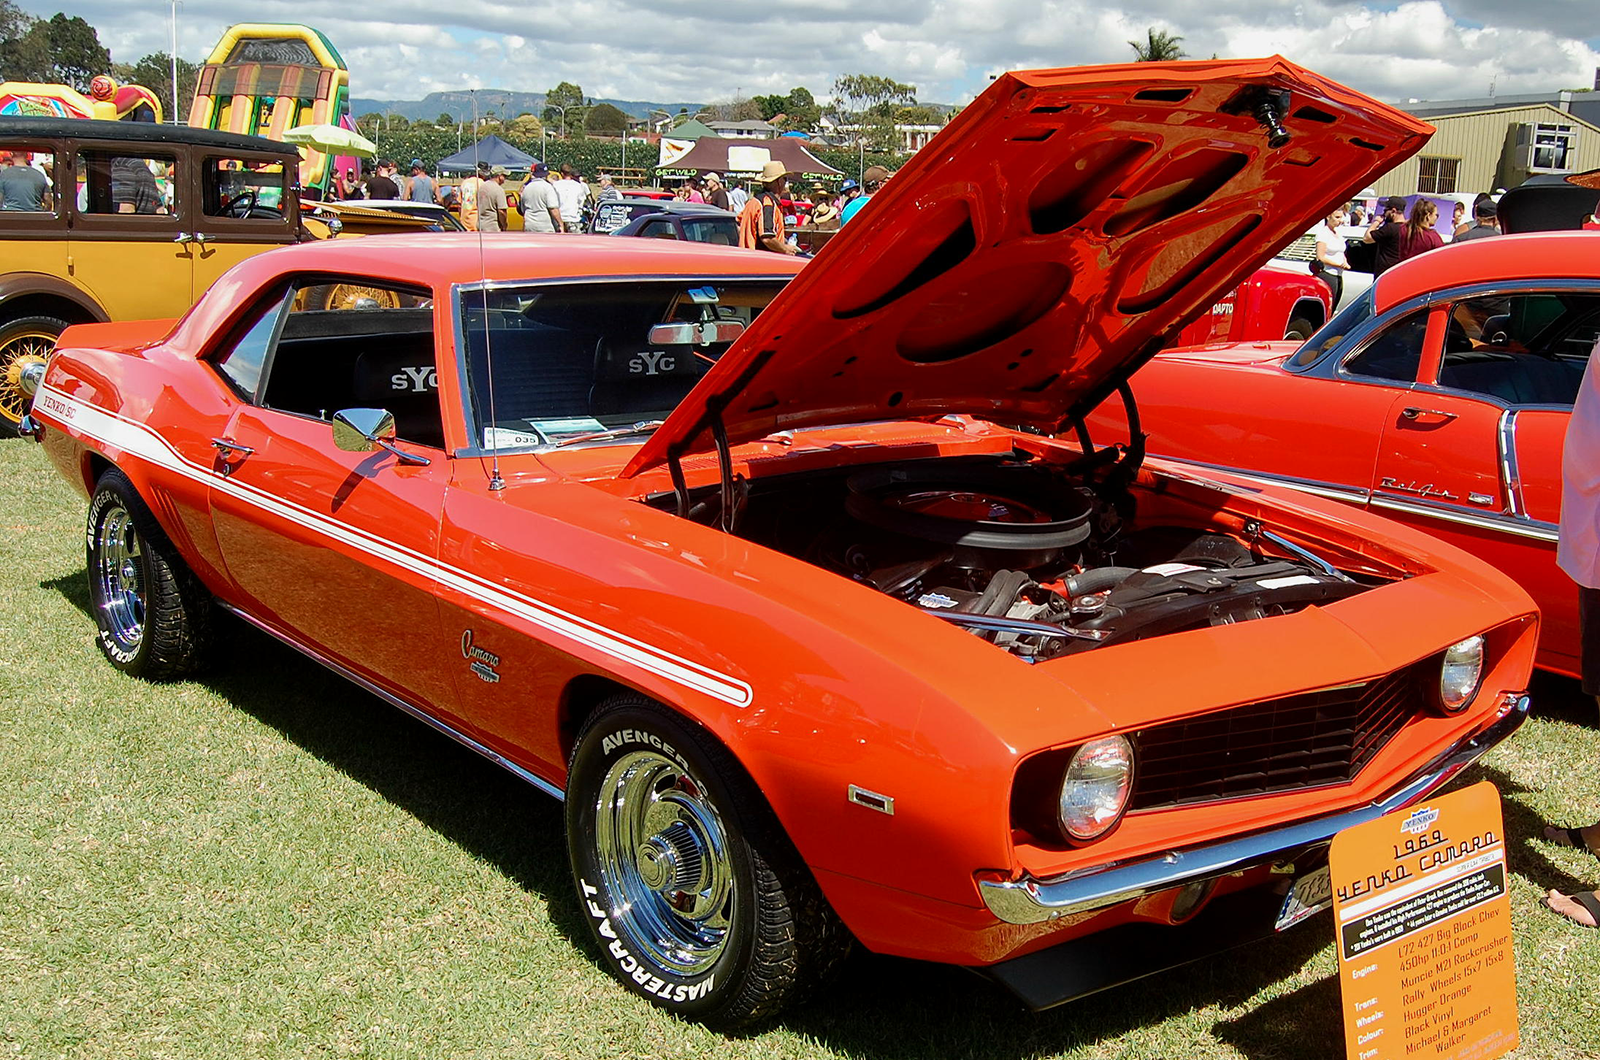 Aussie classics and US muscle cars mingle at Autorama